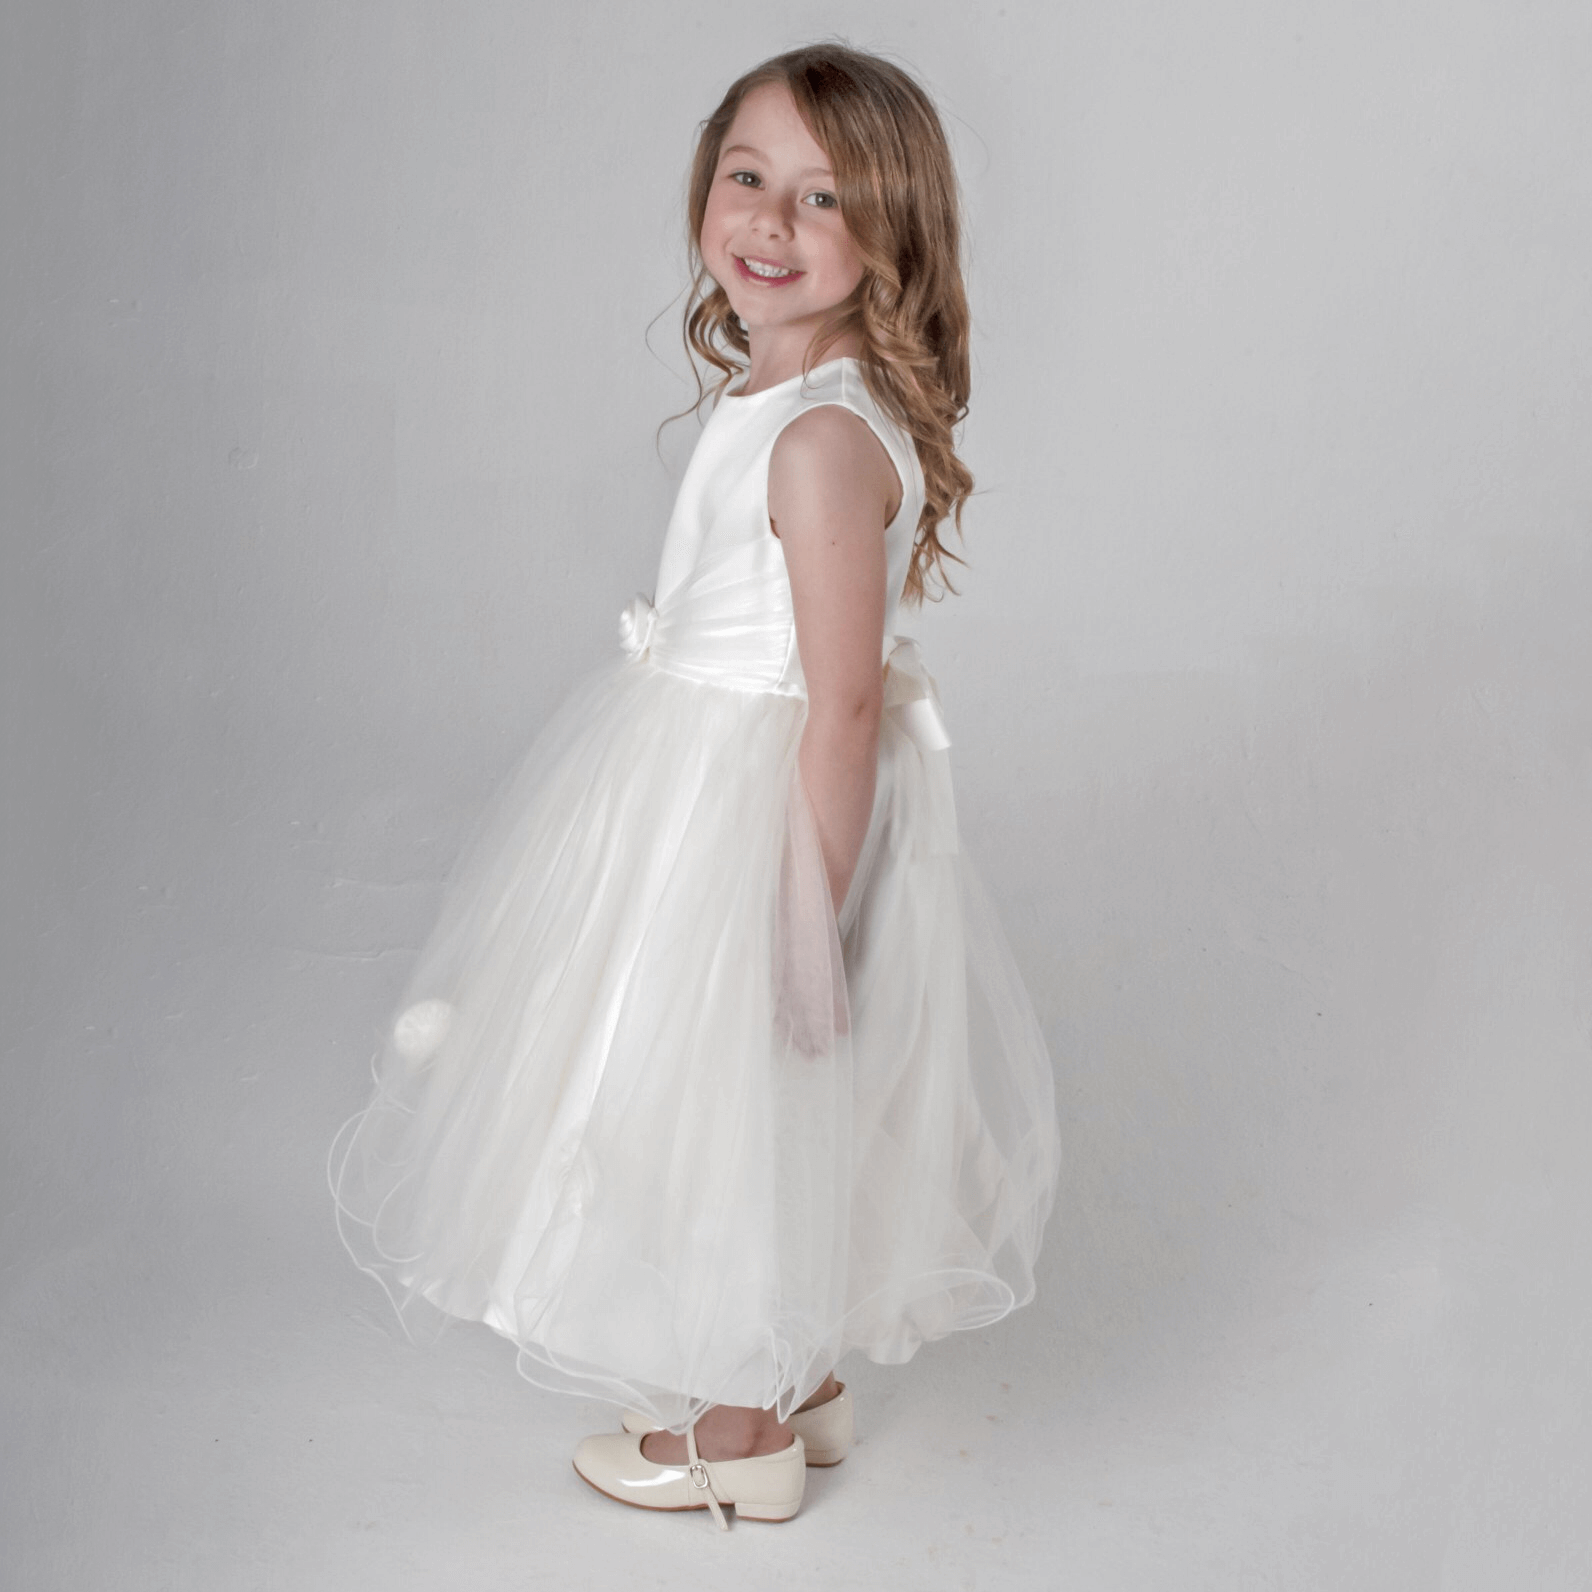 Lilly Dress in ivory being modelled by girl